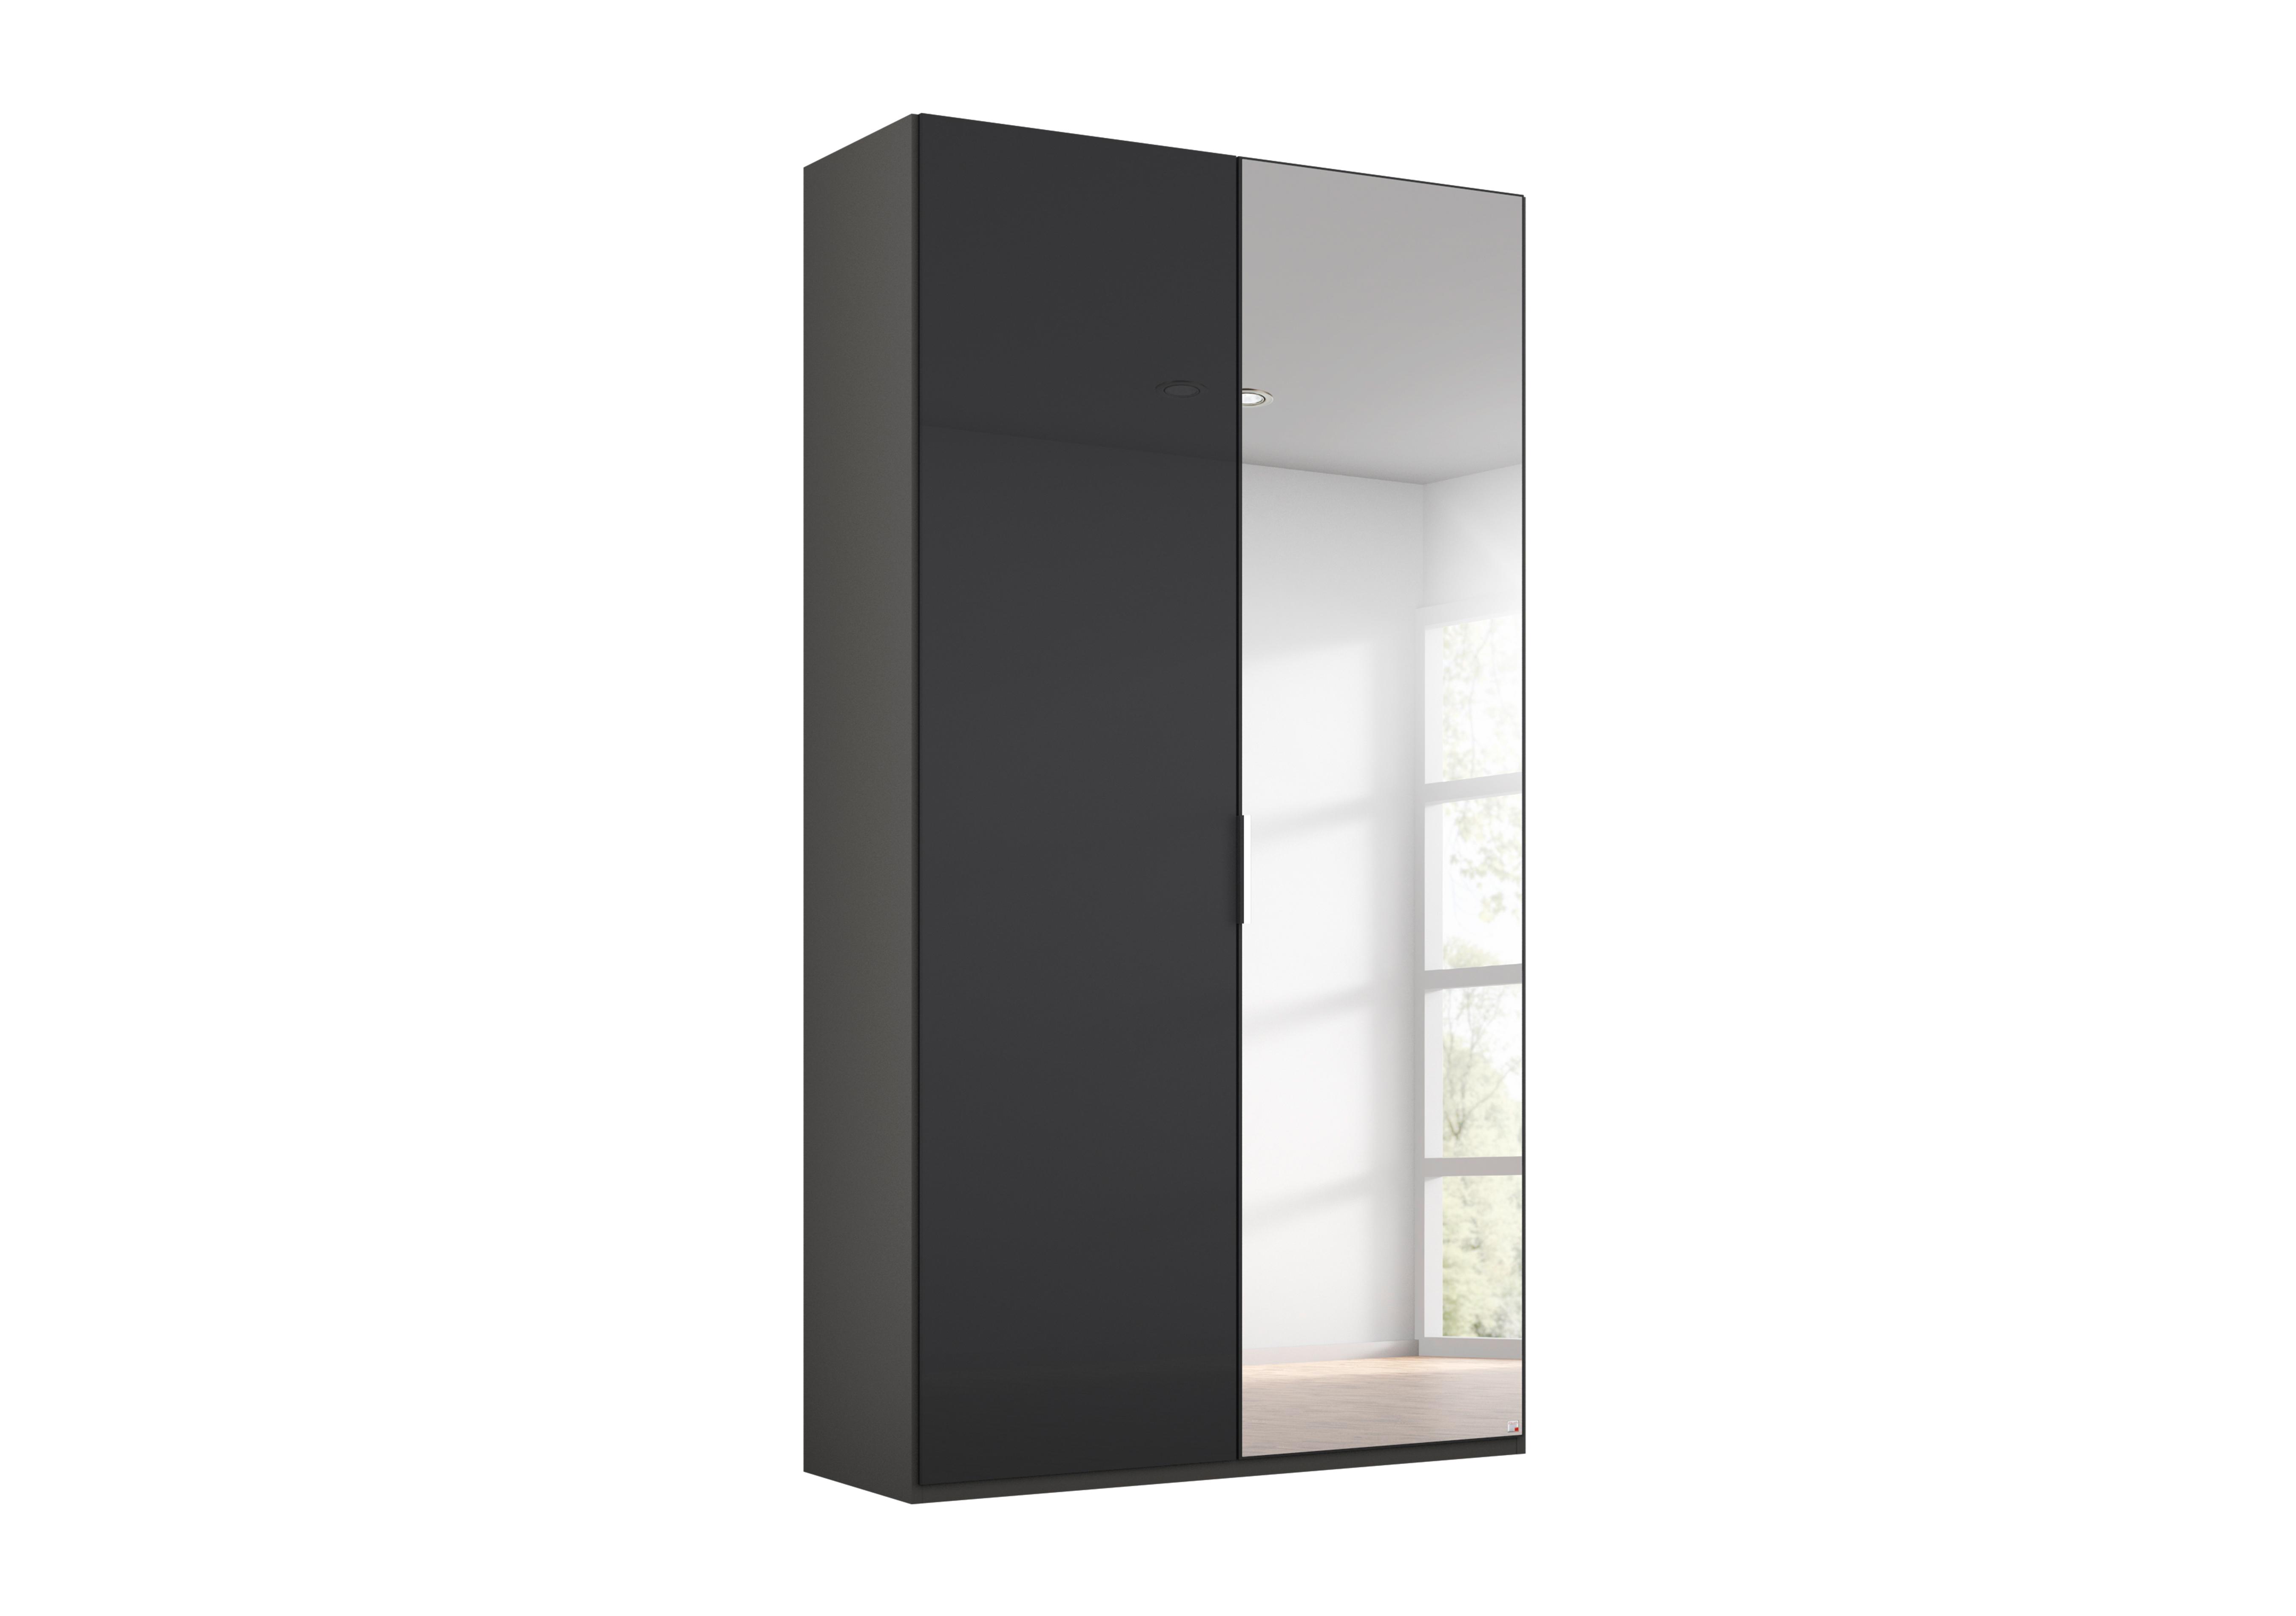 Formes Glass 2 Door Hinged Wardrobe with 1 Mirror in A140b Graphite Basalt Front on Furniture Village